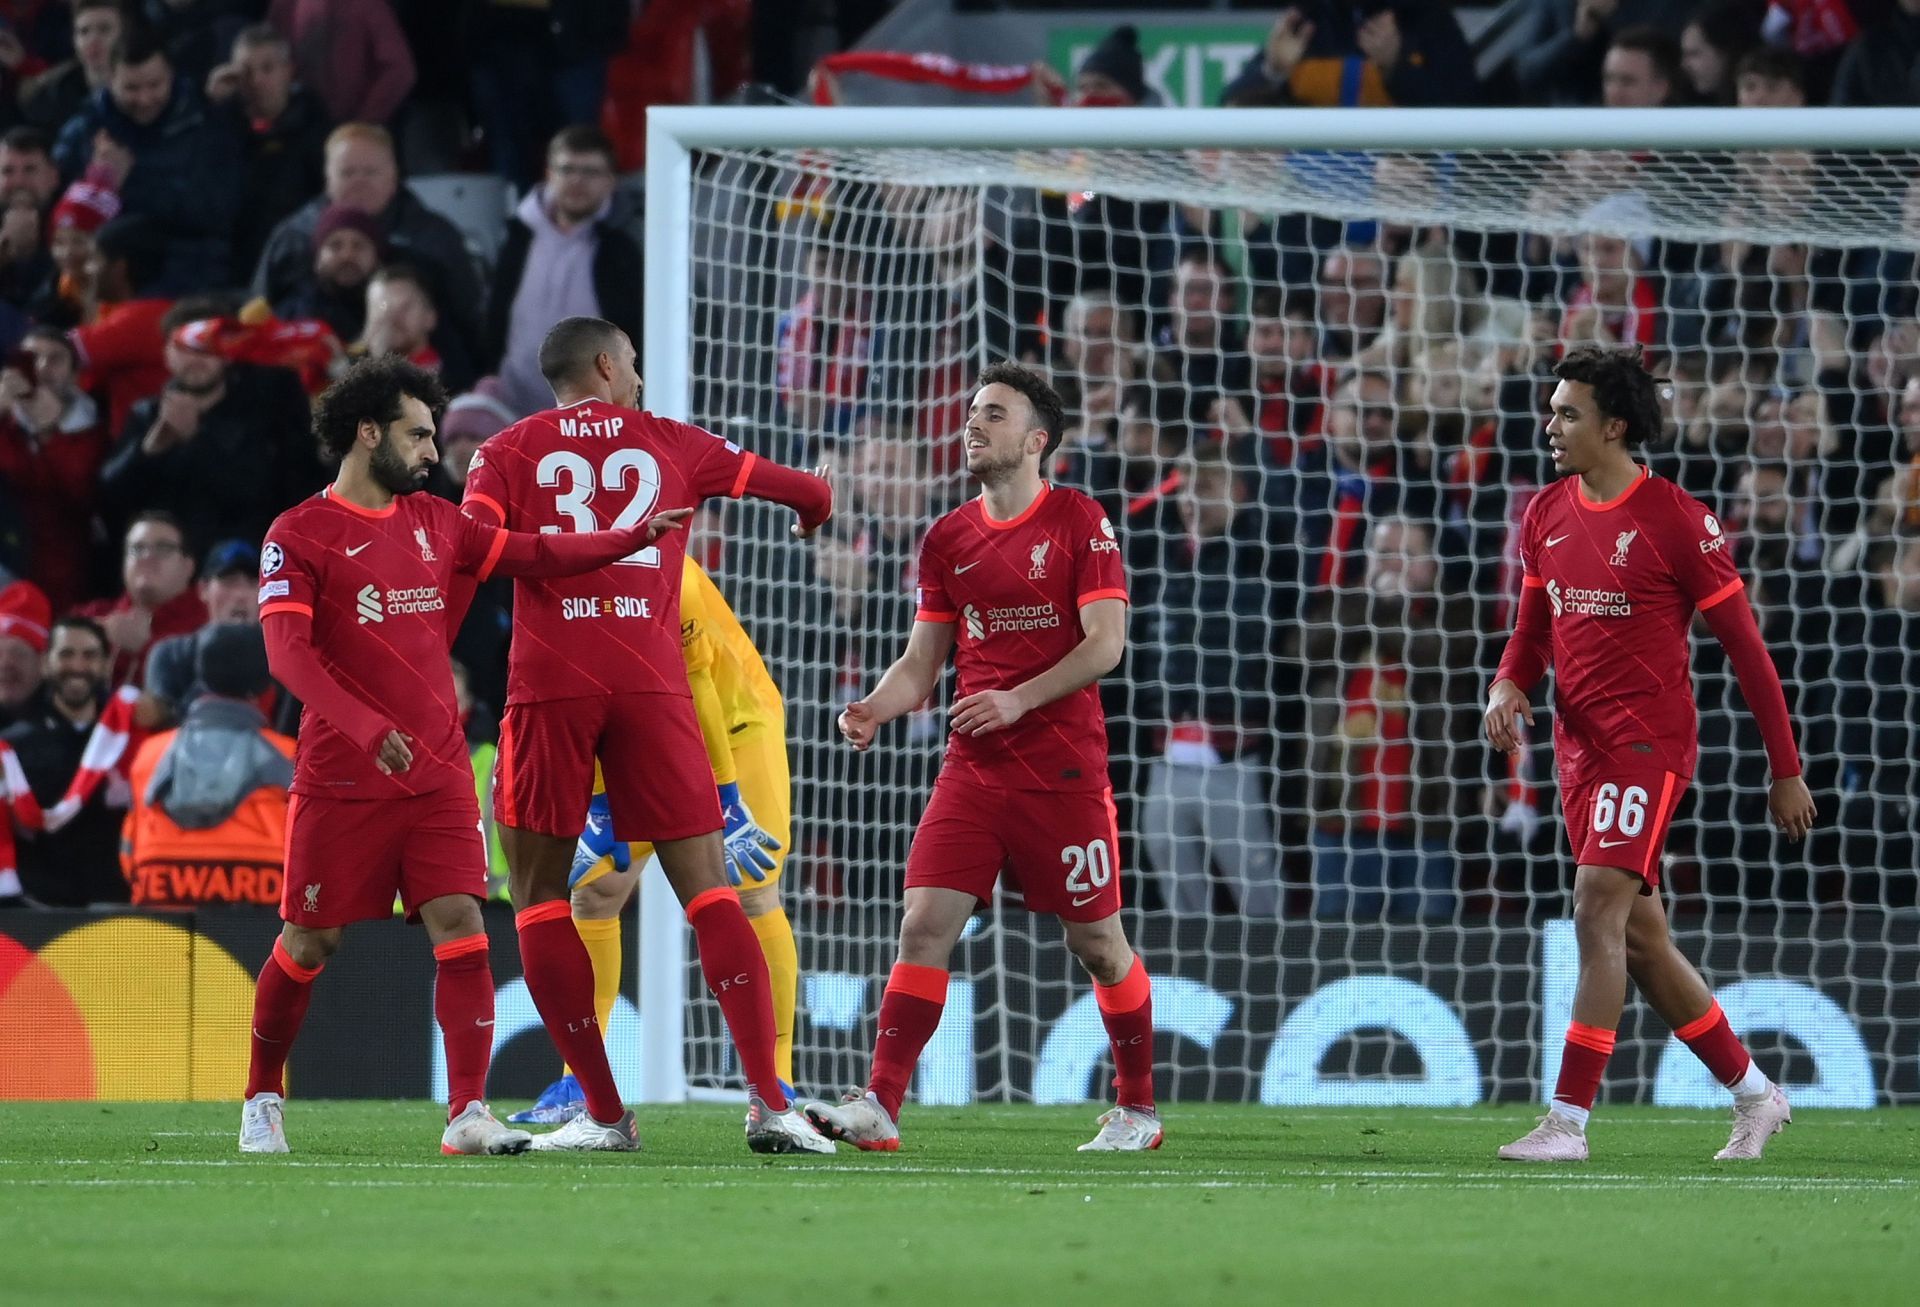 Liverpool beat Atletico Madrid 2-0 in their UEFA Champions League tie on Wednesday